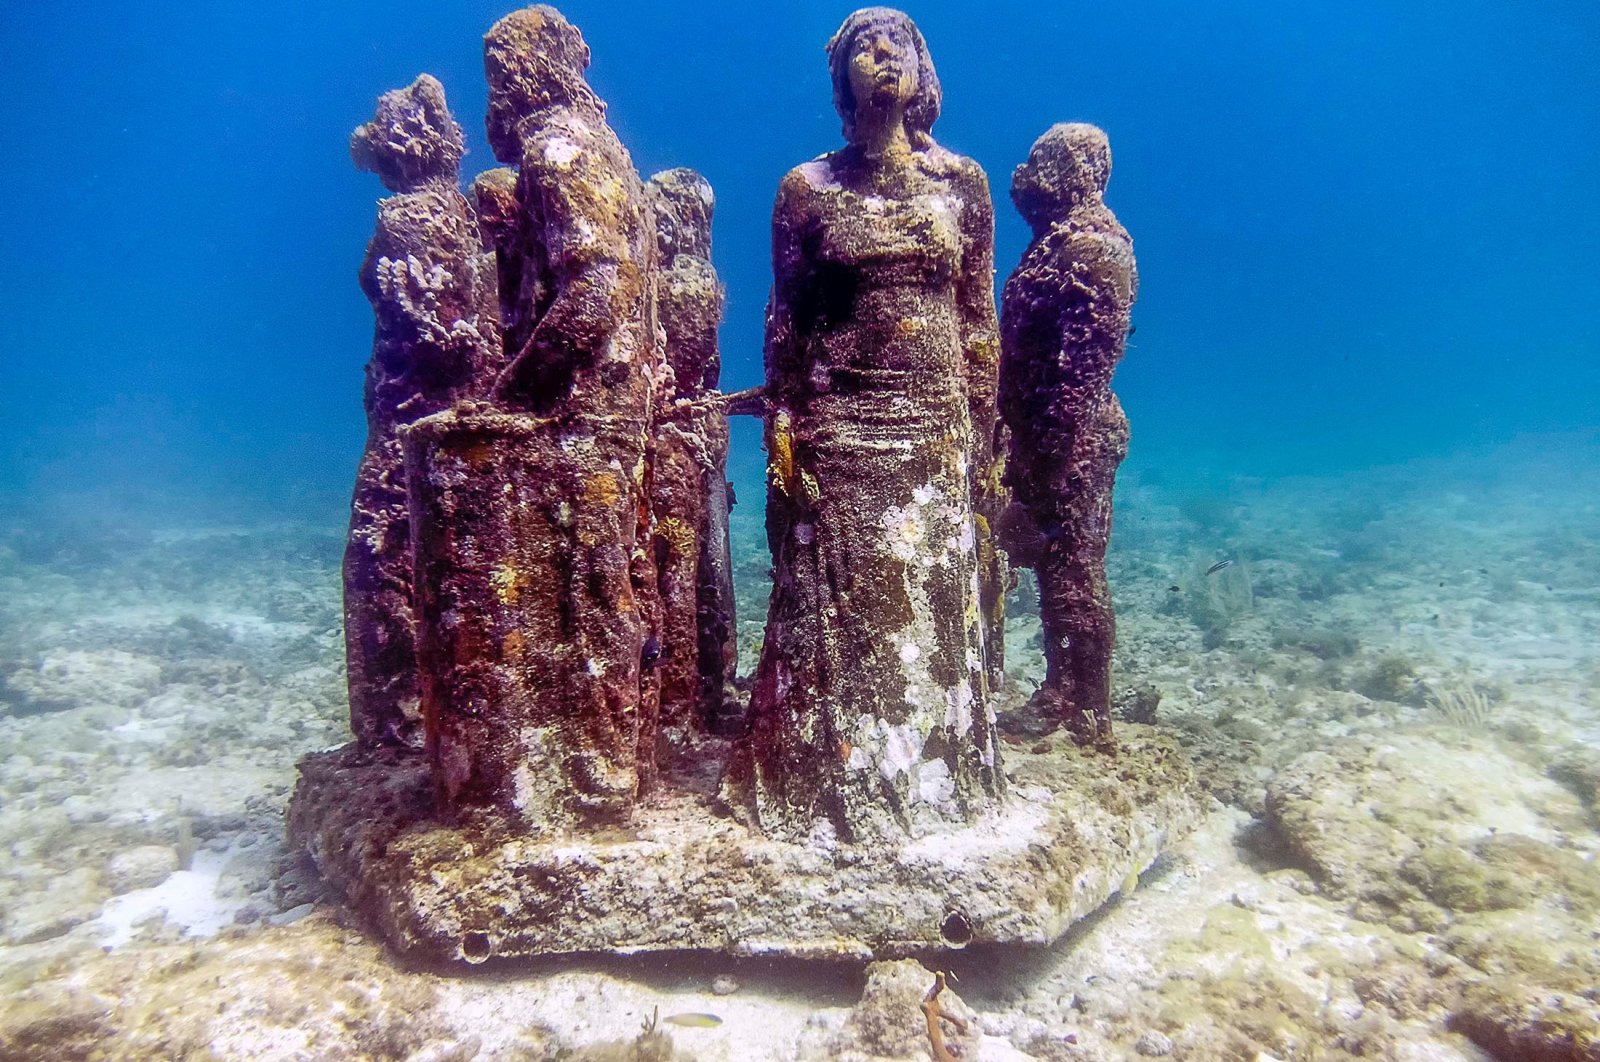 An installation at the Cancun Underwater Museum, in Cancun, Mexico. (Shutterstock Photo)